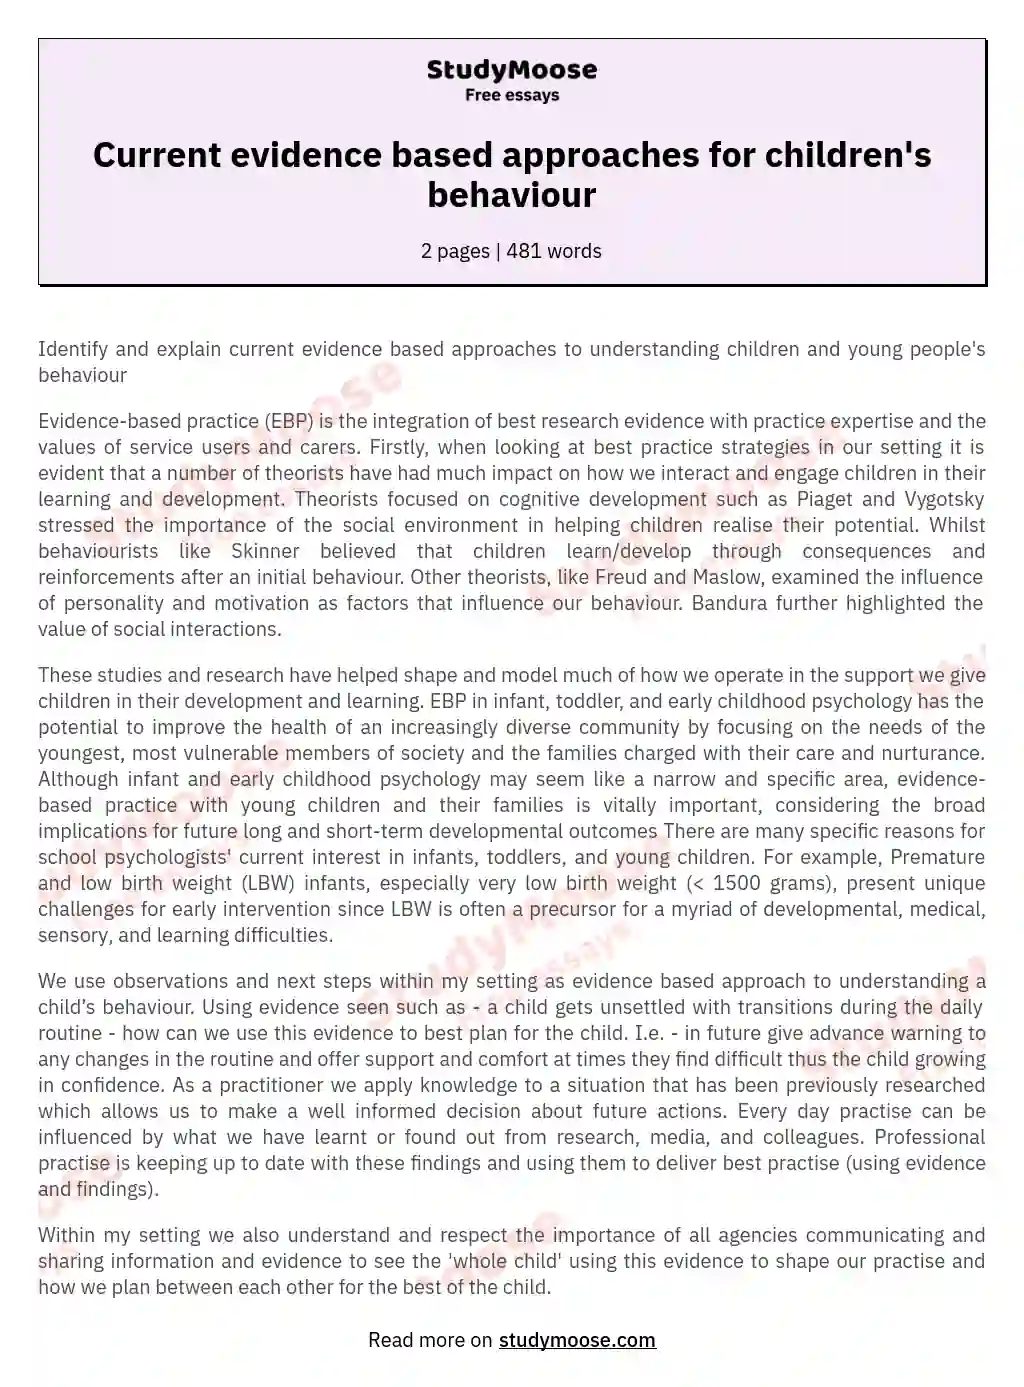 Current evidence based approaches for children's behaviour essay